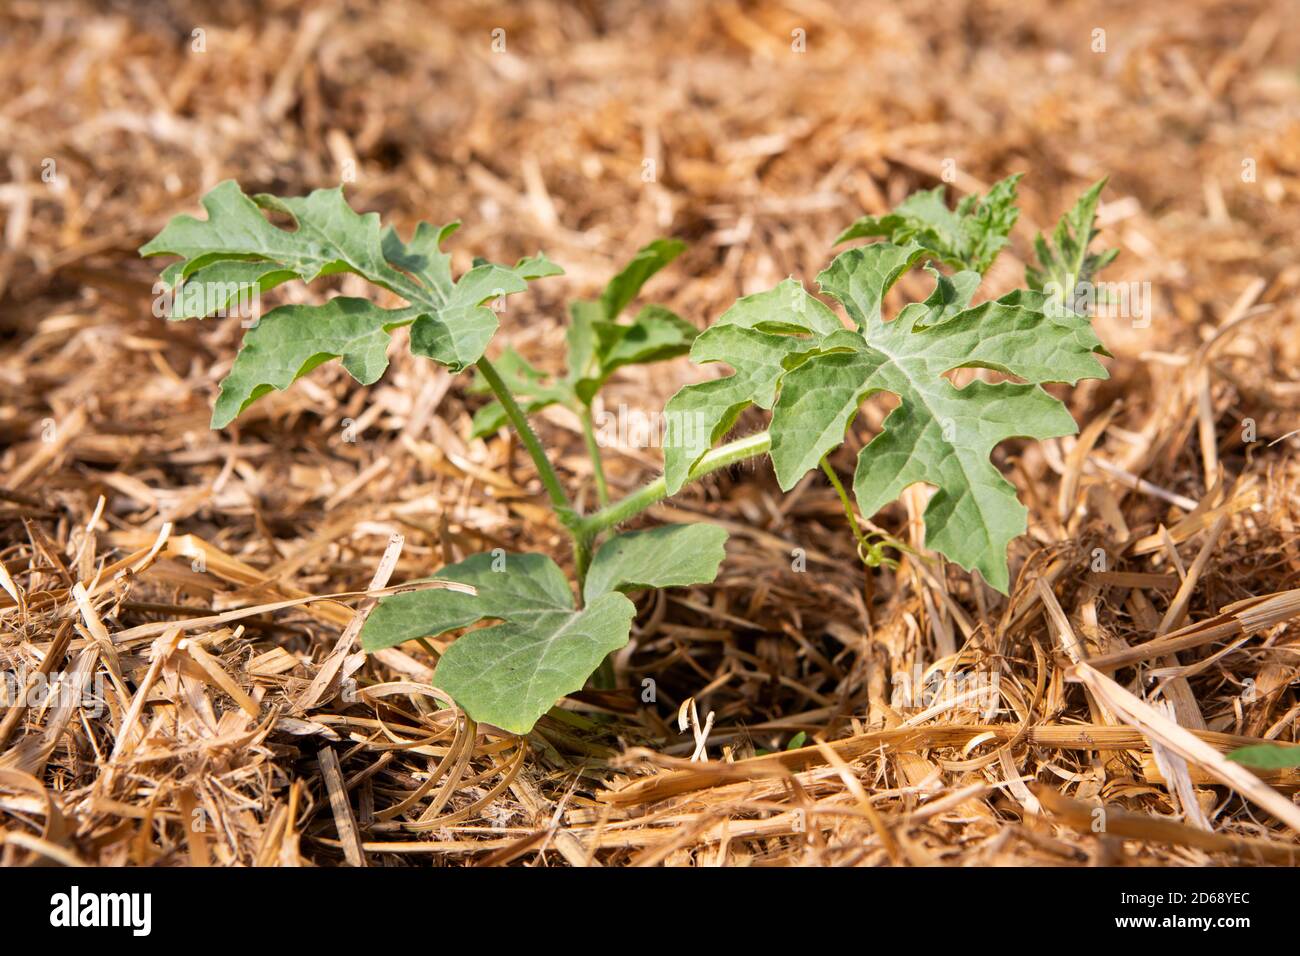 Organic small Pastèque or Watermelon plant (Citrullus lanatus) growing in a mulch bedding of straw. Stock Photo